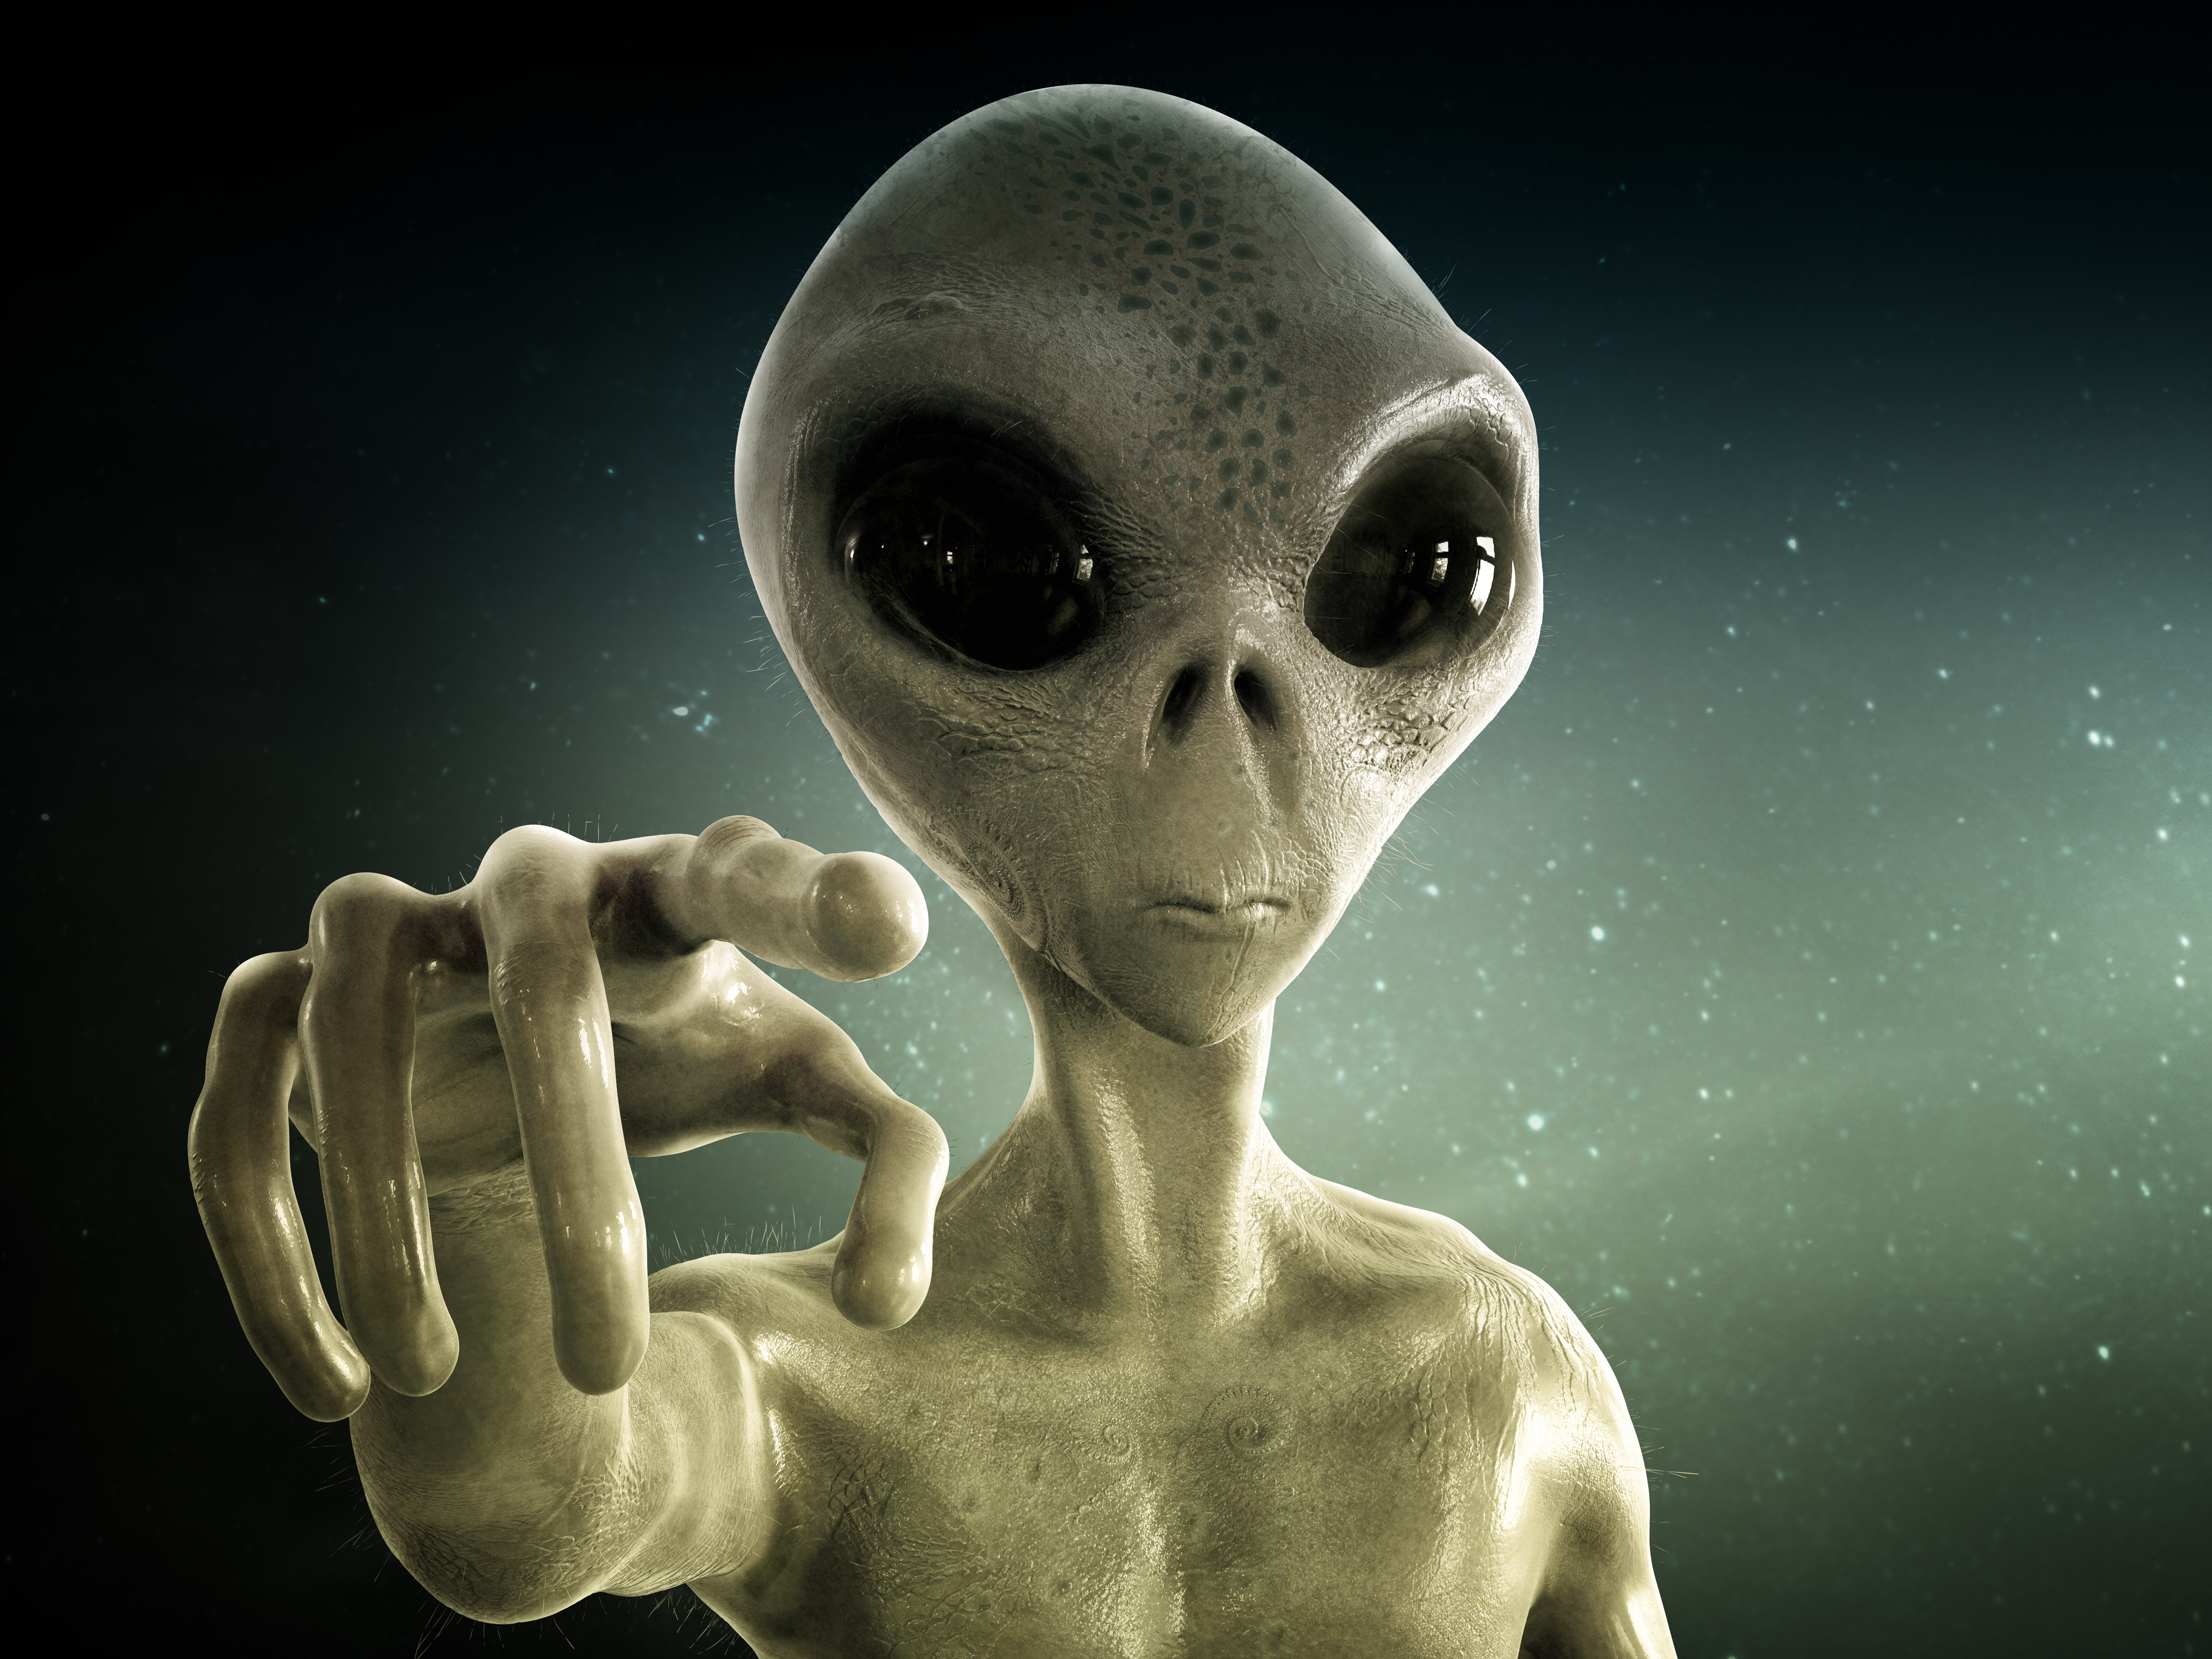 Aliens may be more like us than we think